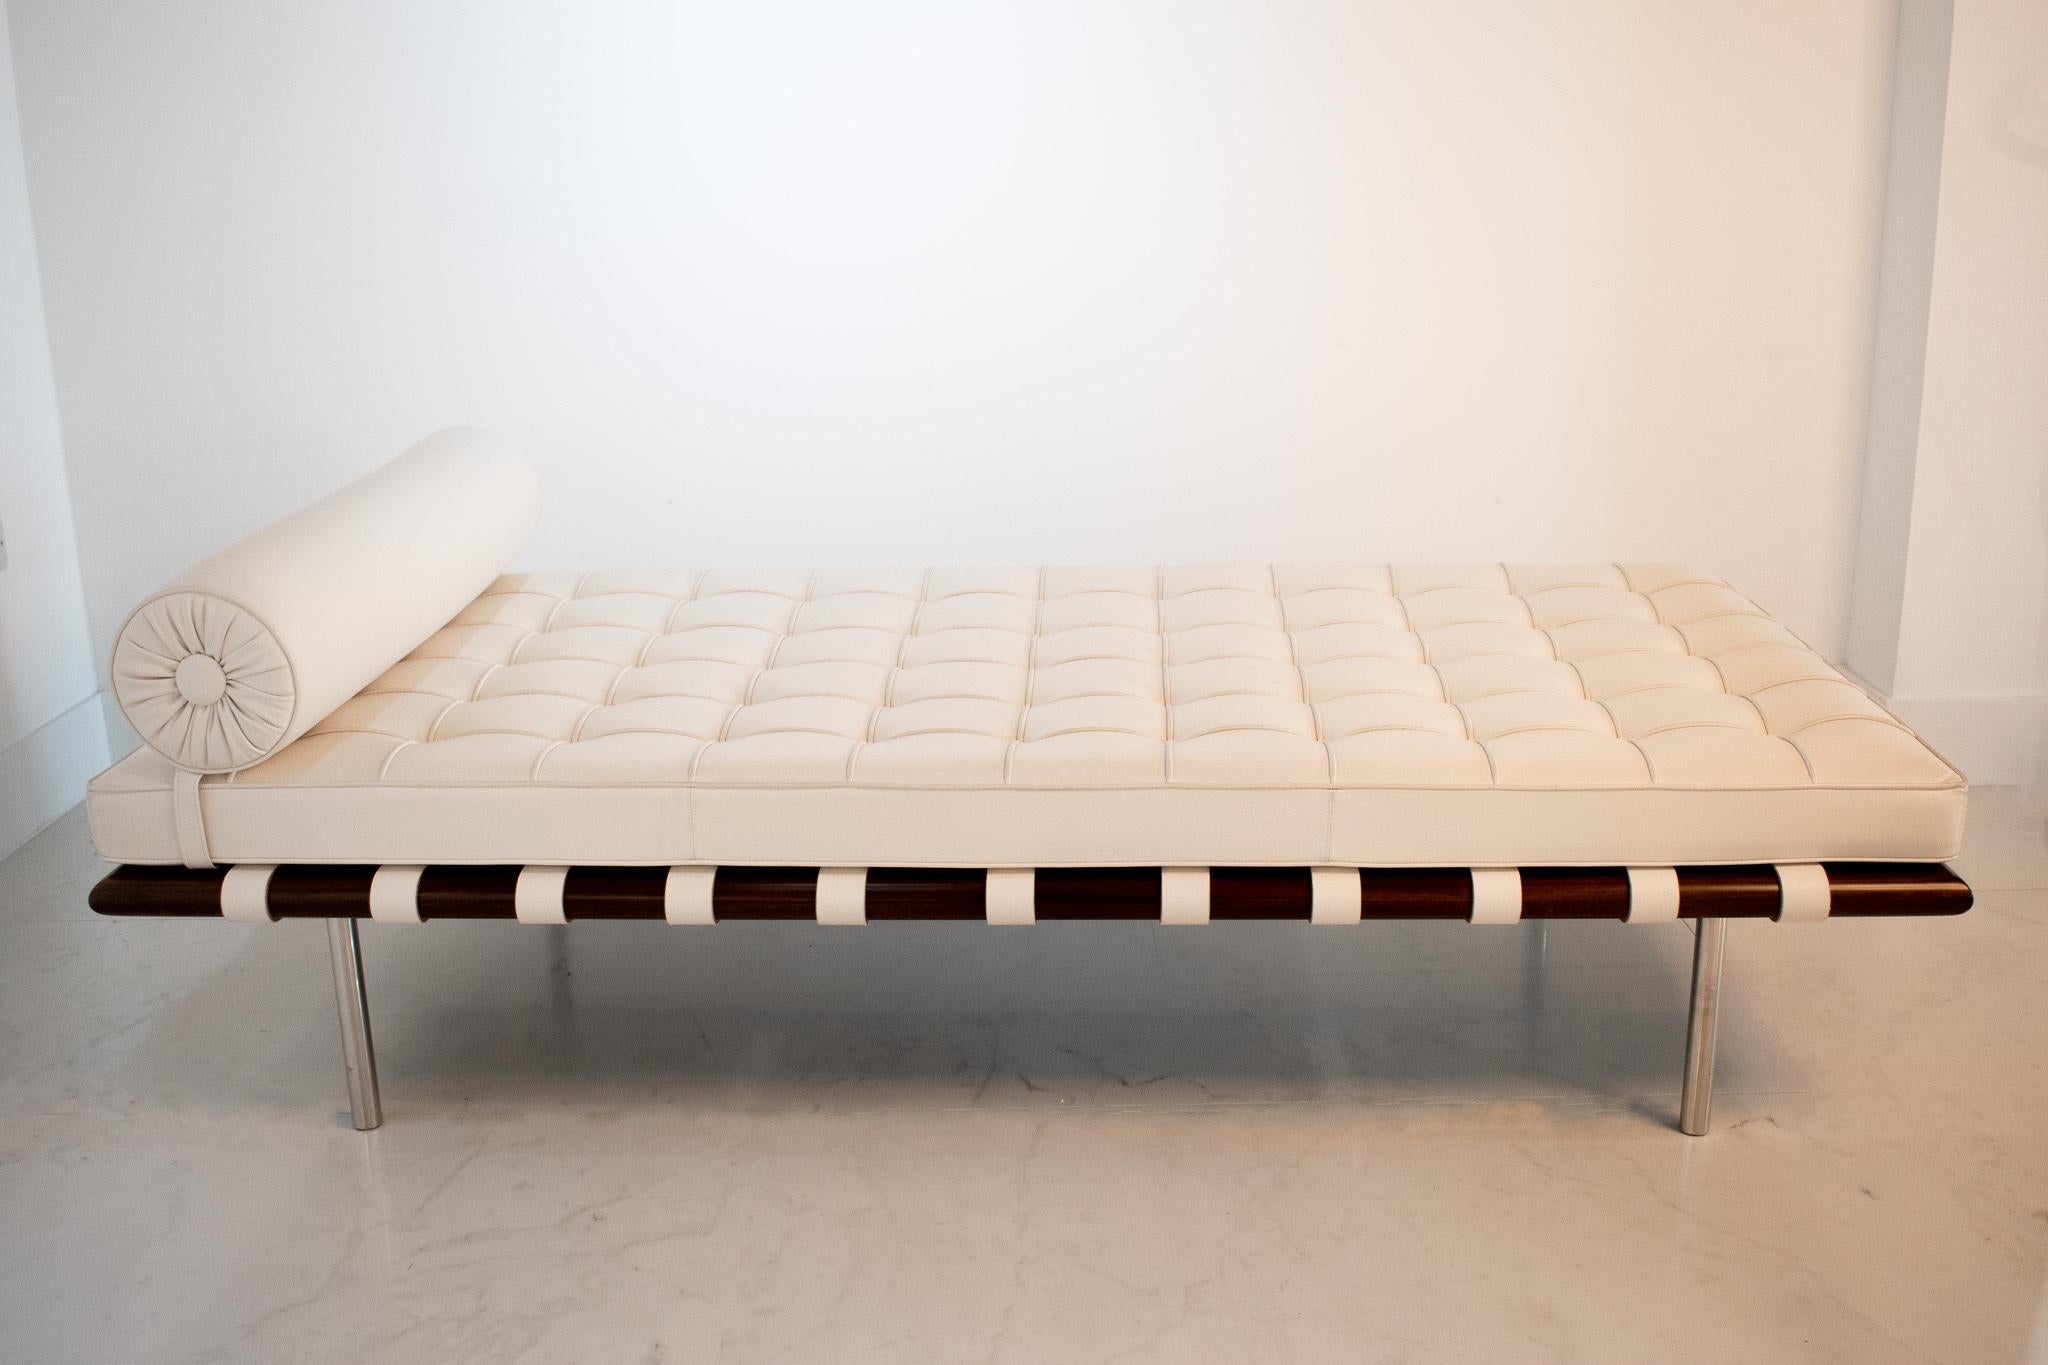 A stunning example this Barcelona Day Bed by Mies van der Rohe for Knoll Studio is upholstered in Cream Leather set on chrome legs. 

This is a recent example manufactured in circa 2000s - in excellent condition.

Knoll studio stamp can be found on